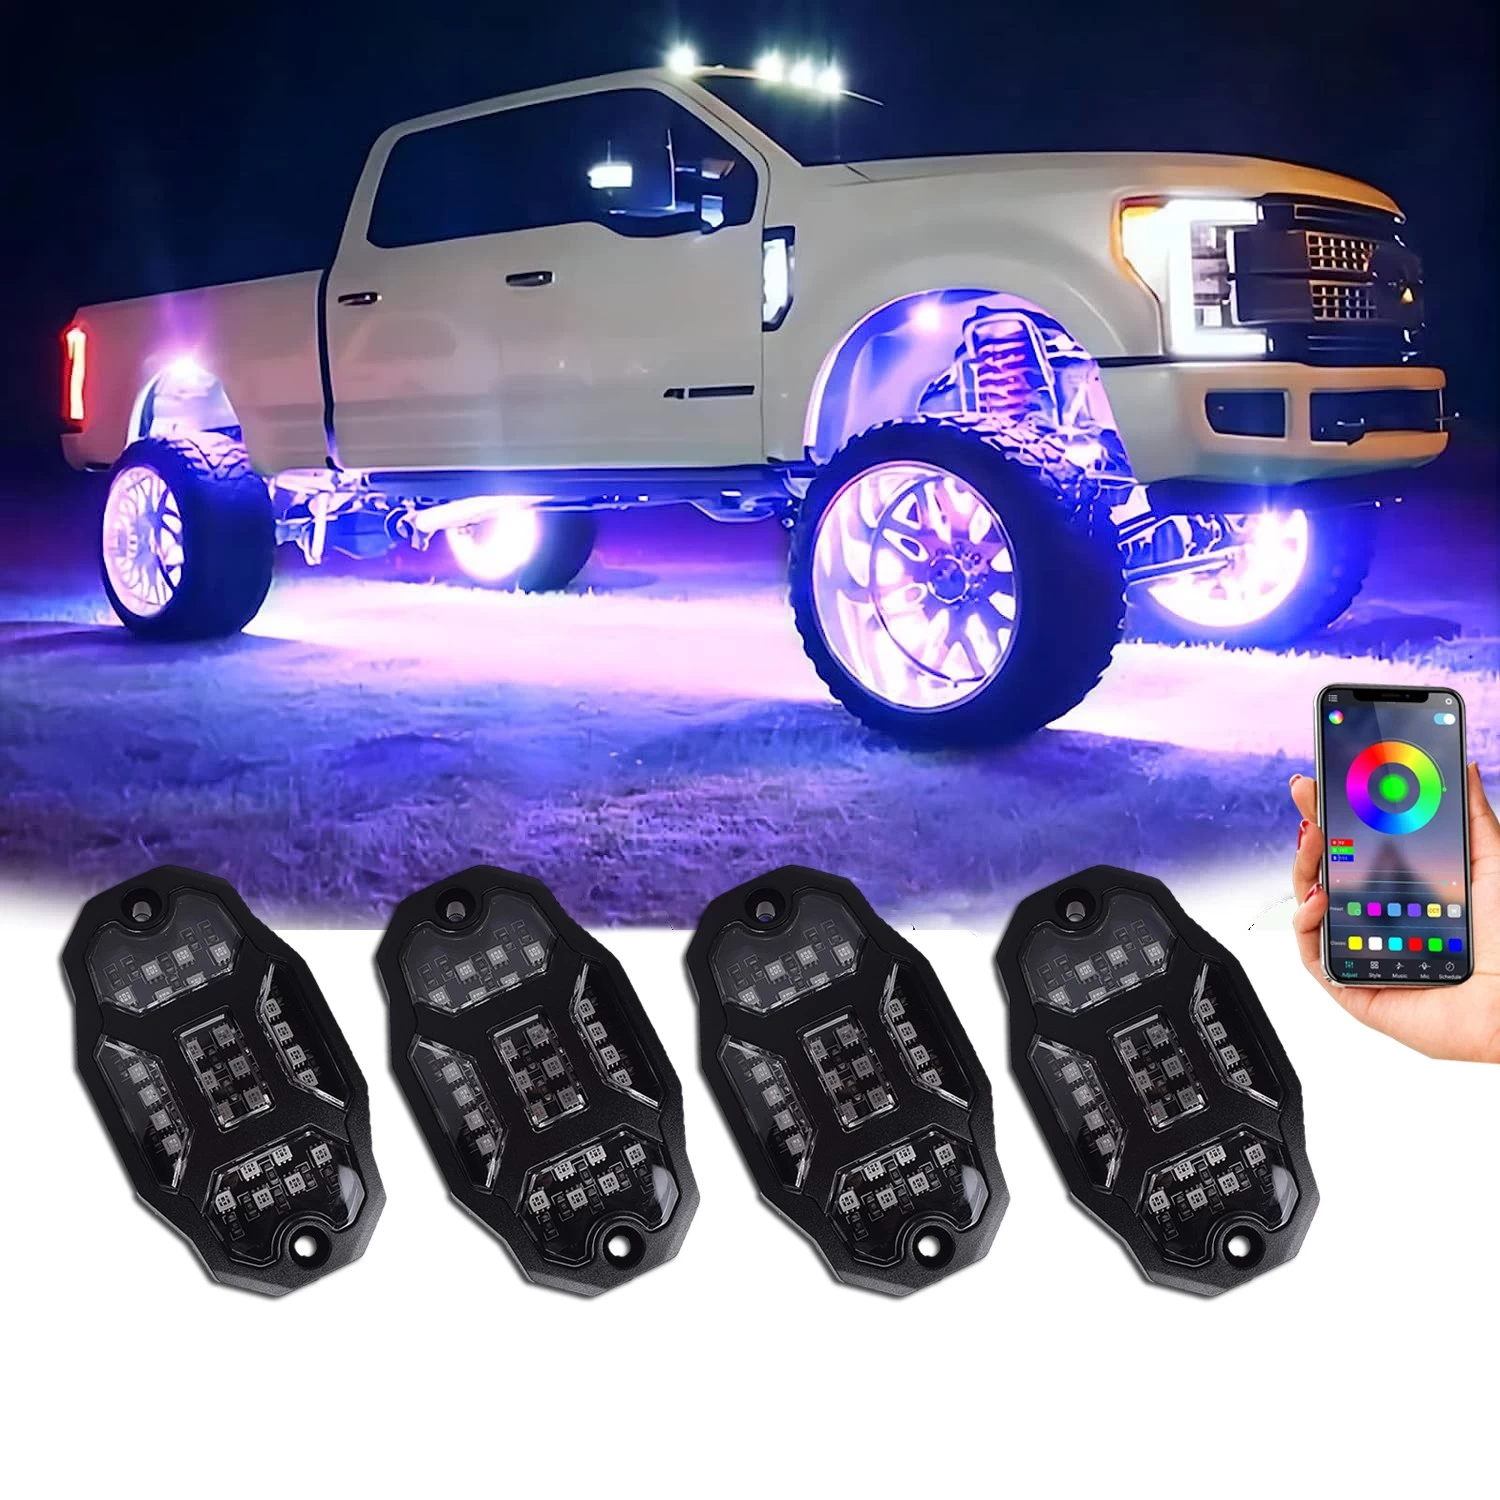 5 Sides Undergolw Rock Light For Car Jeep Off-Road Truck Boat Bluetooth APP Control 4/6/8 In 1 RGB LED Rock Lights Chassis Light Music Sync